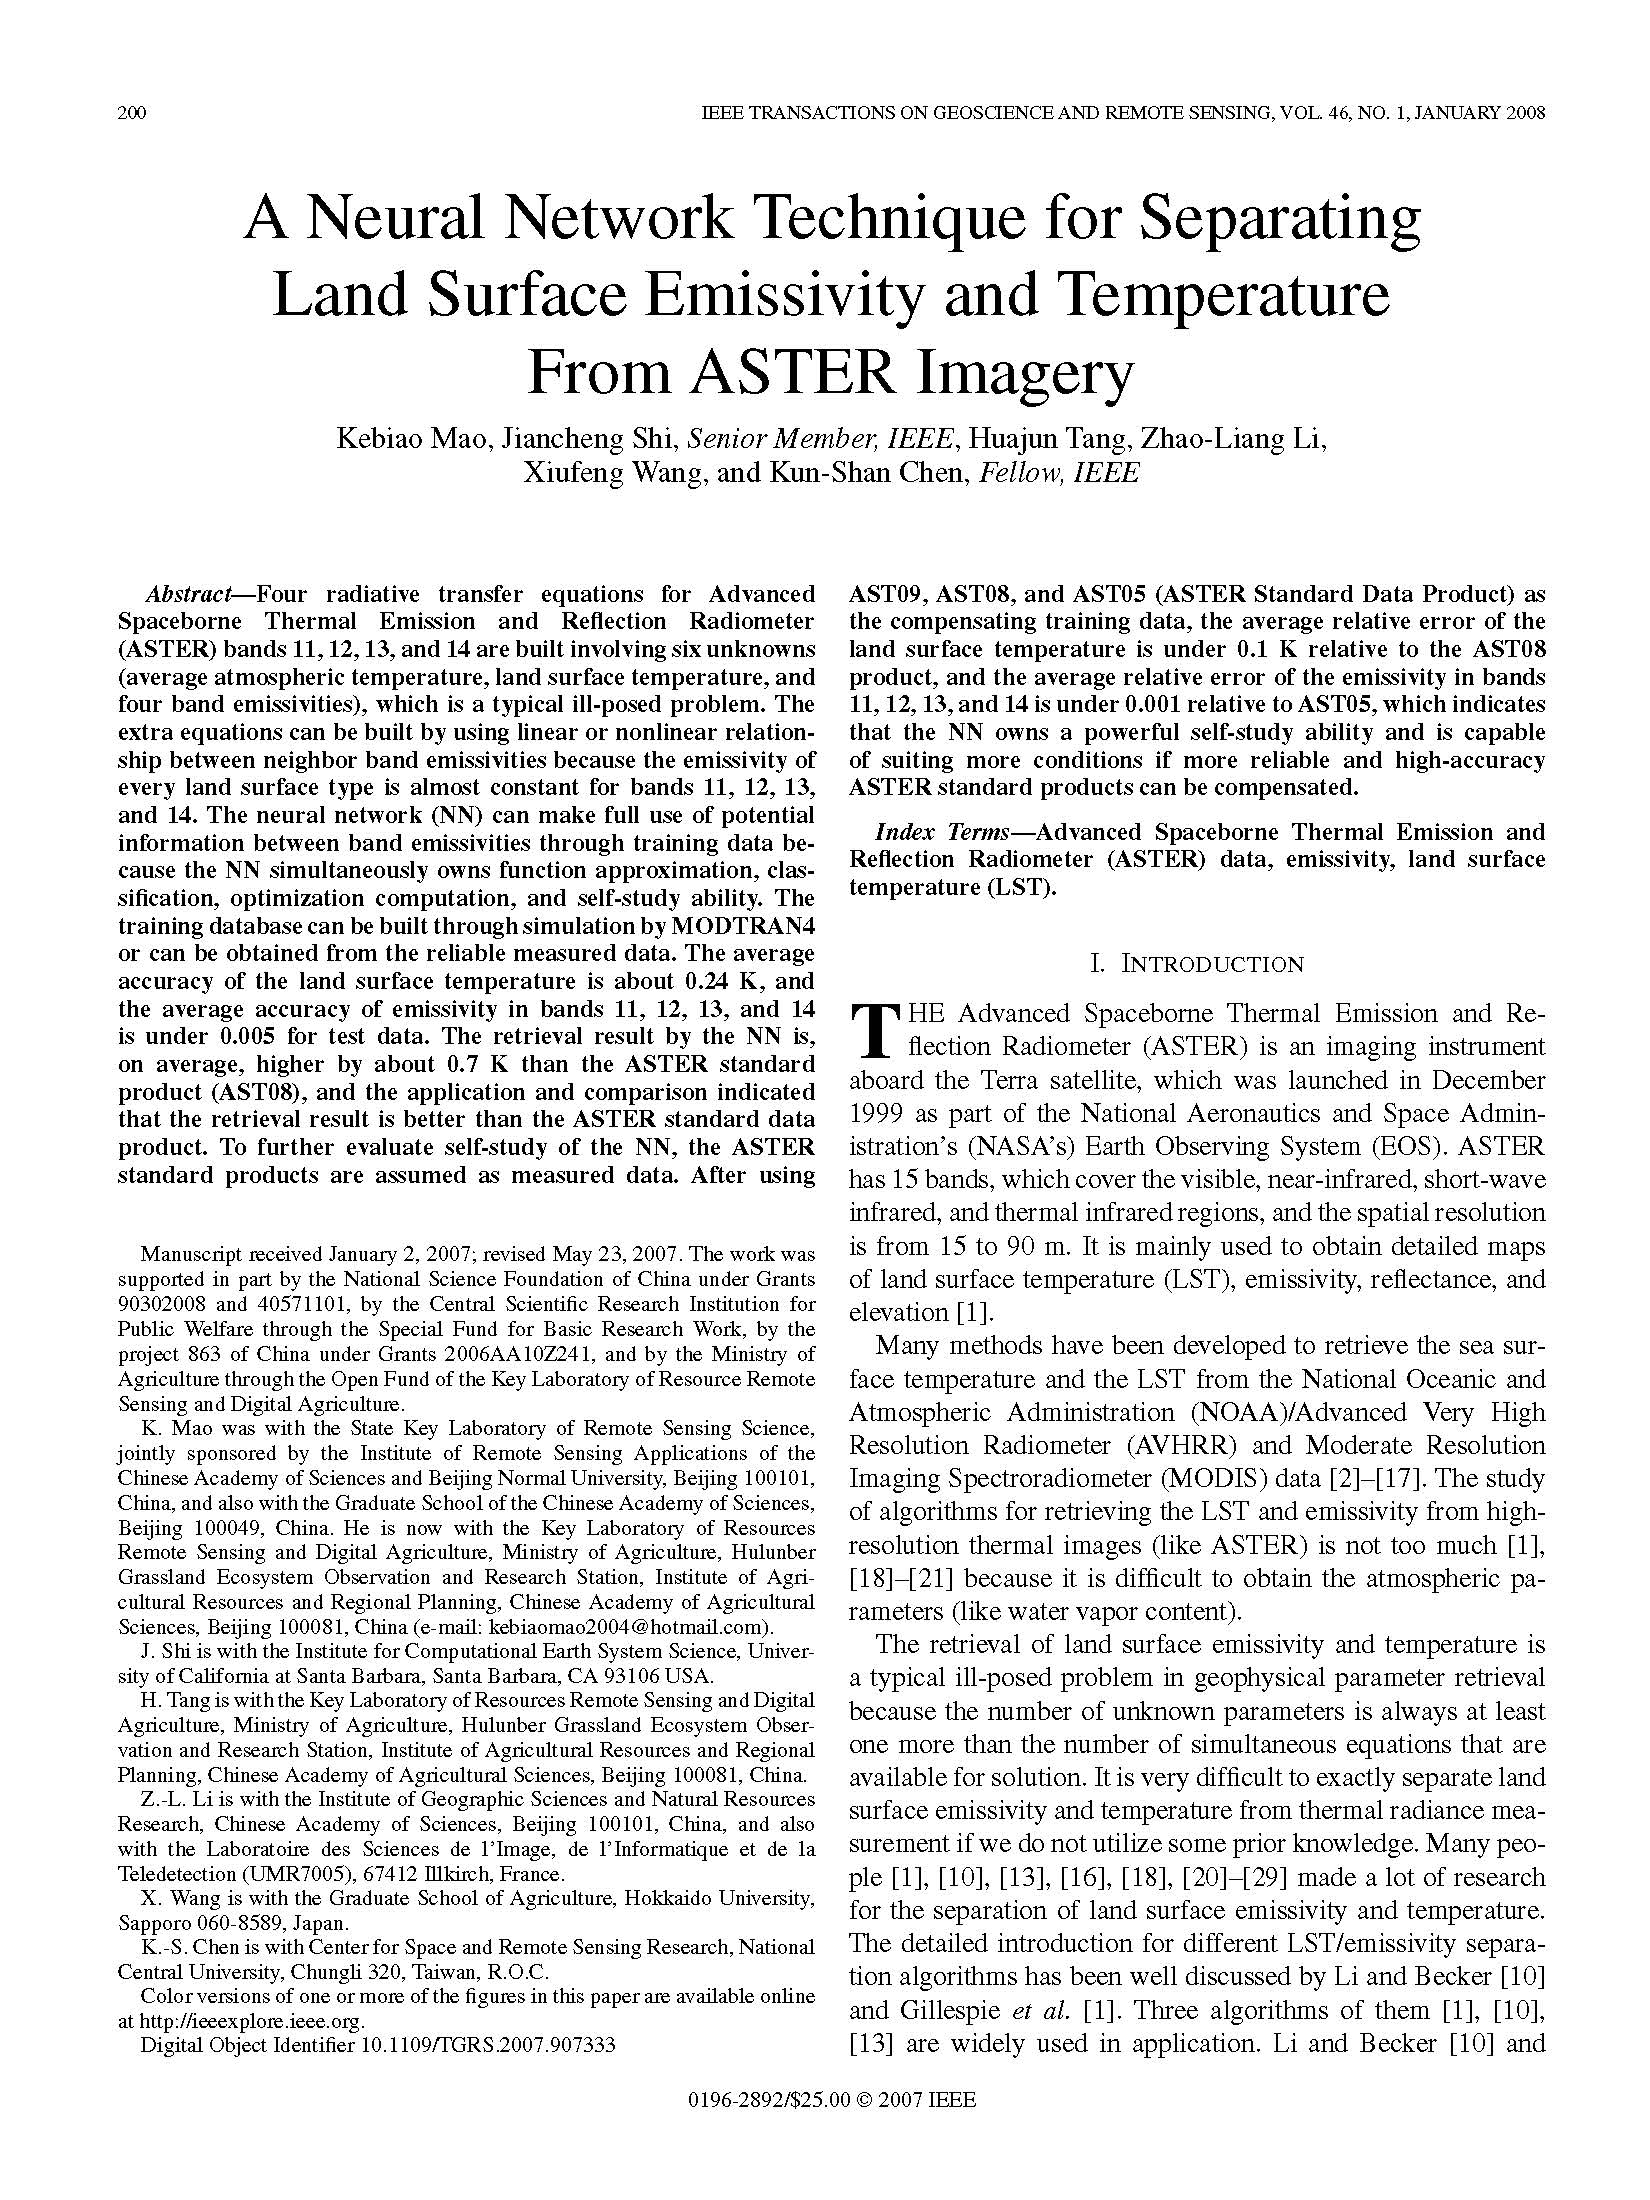 A Neural Network Technique for Separating Land Surface Emissivity and Temperatur.jpg